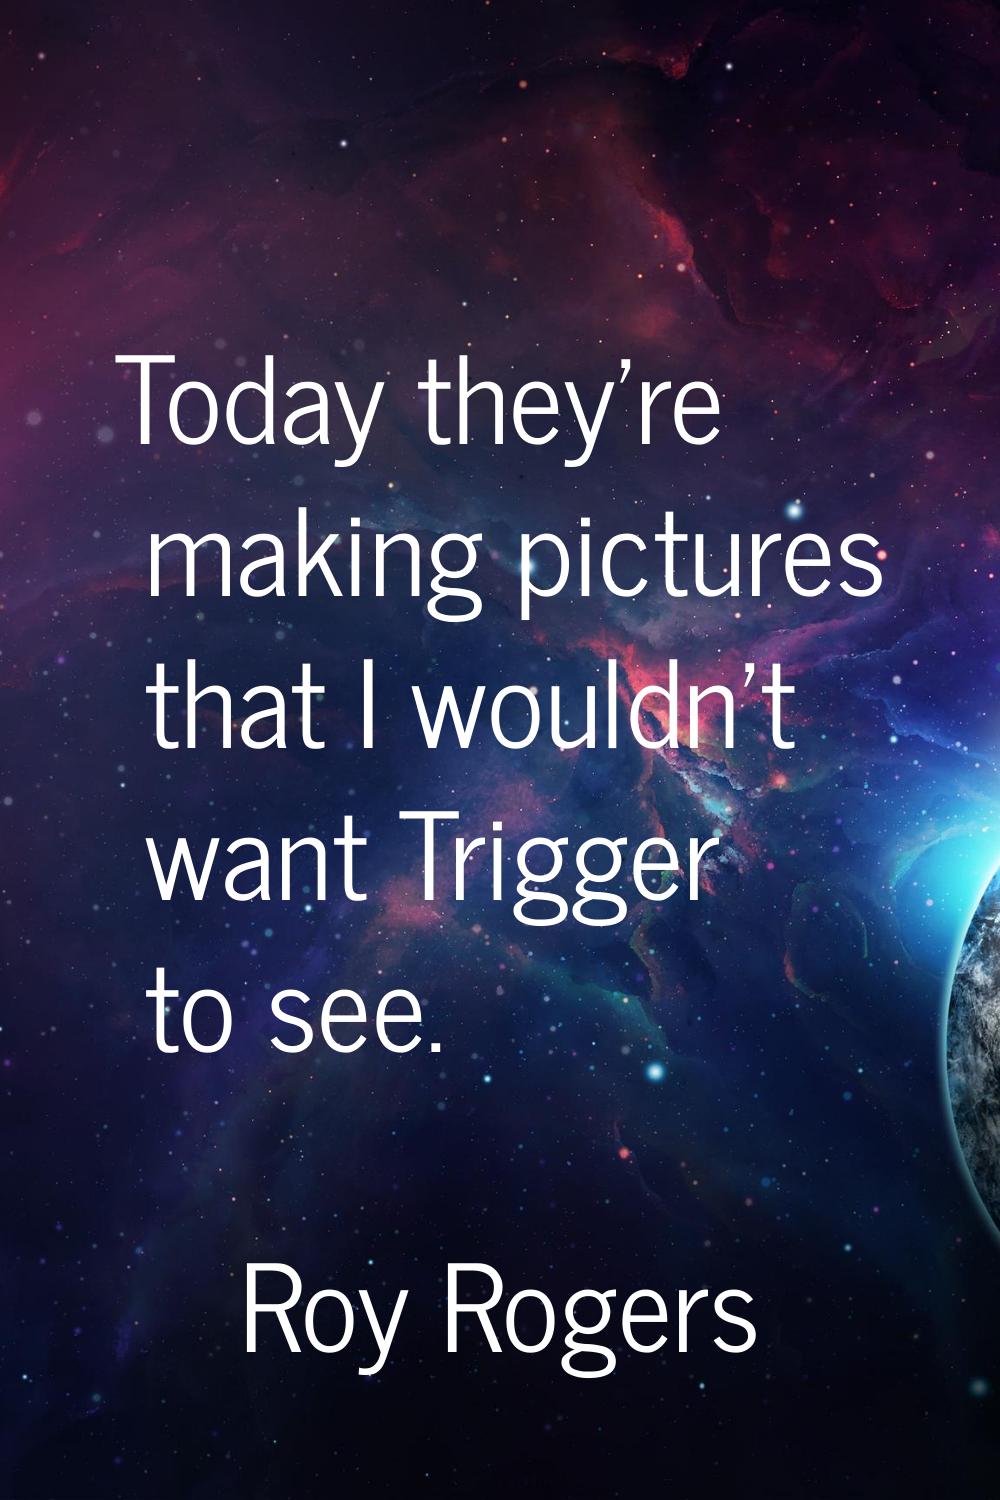 Today they're making pictures that I wouldn't want Trigger to see.